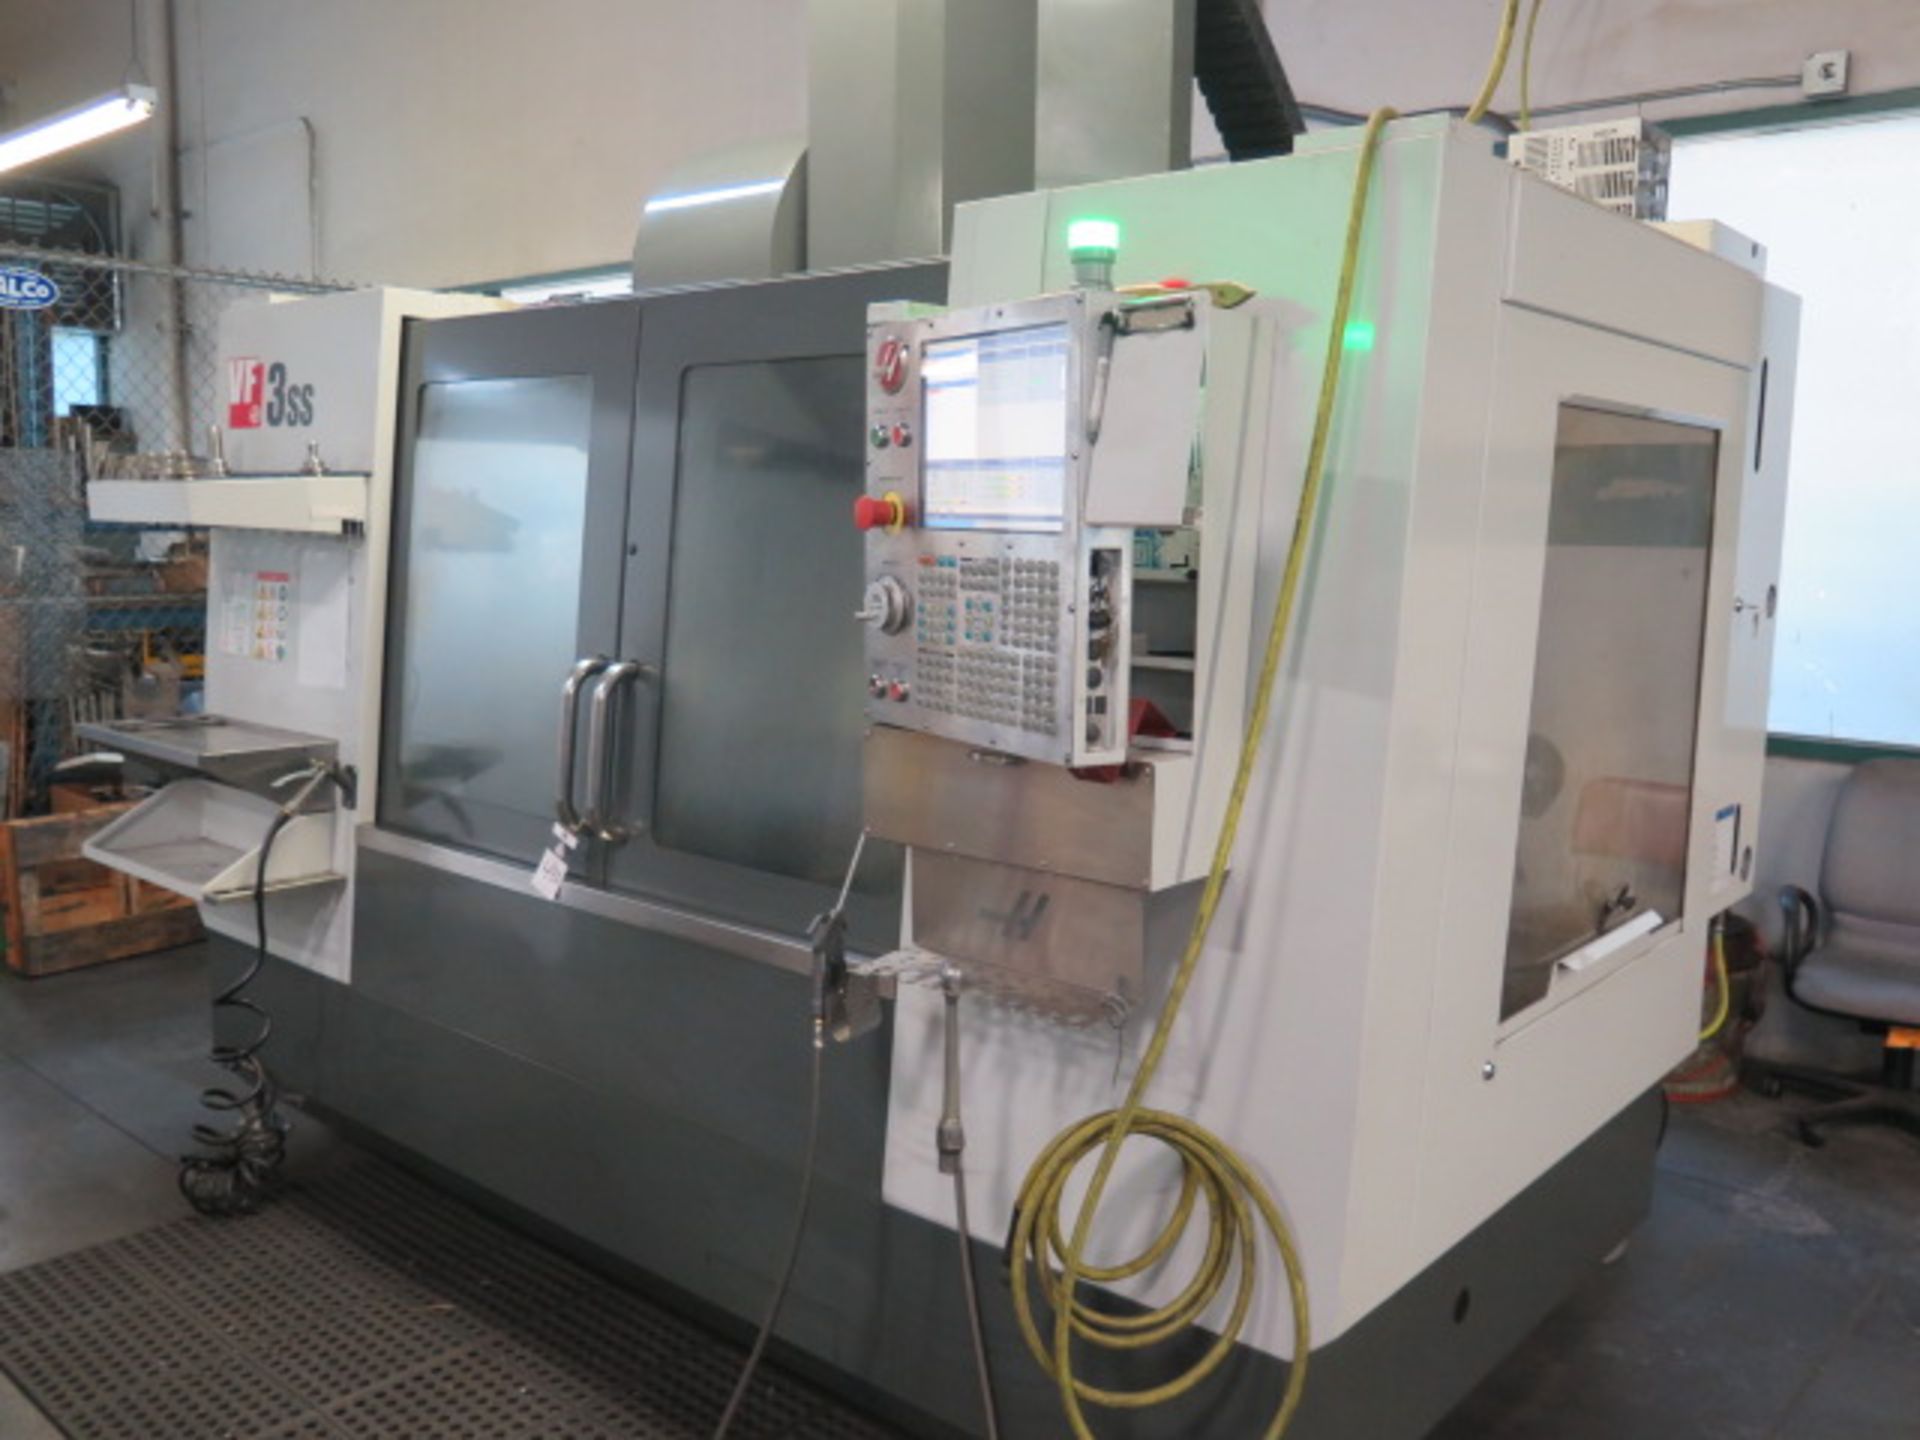 2016 Haas VF-3SS 4-Axis CNC VMCs/n 1132154 w/ Haas Controls, Hand Wheel, SOLD AS IS, LIVERMORE, CA - Image 3 of 17